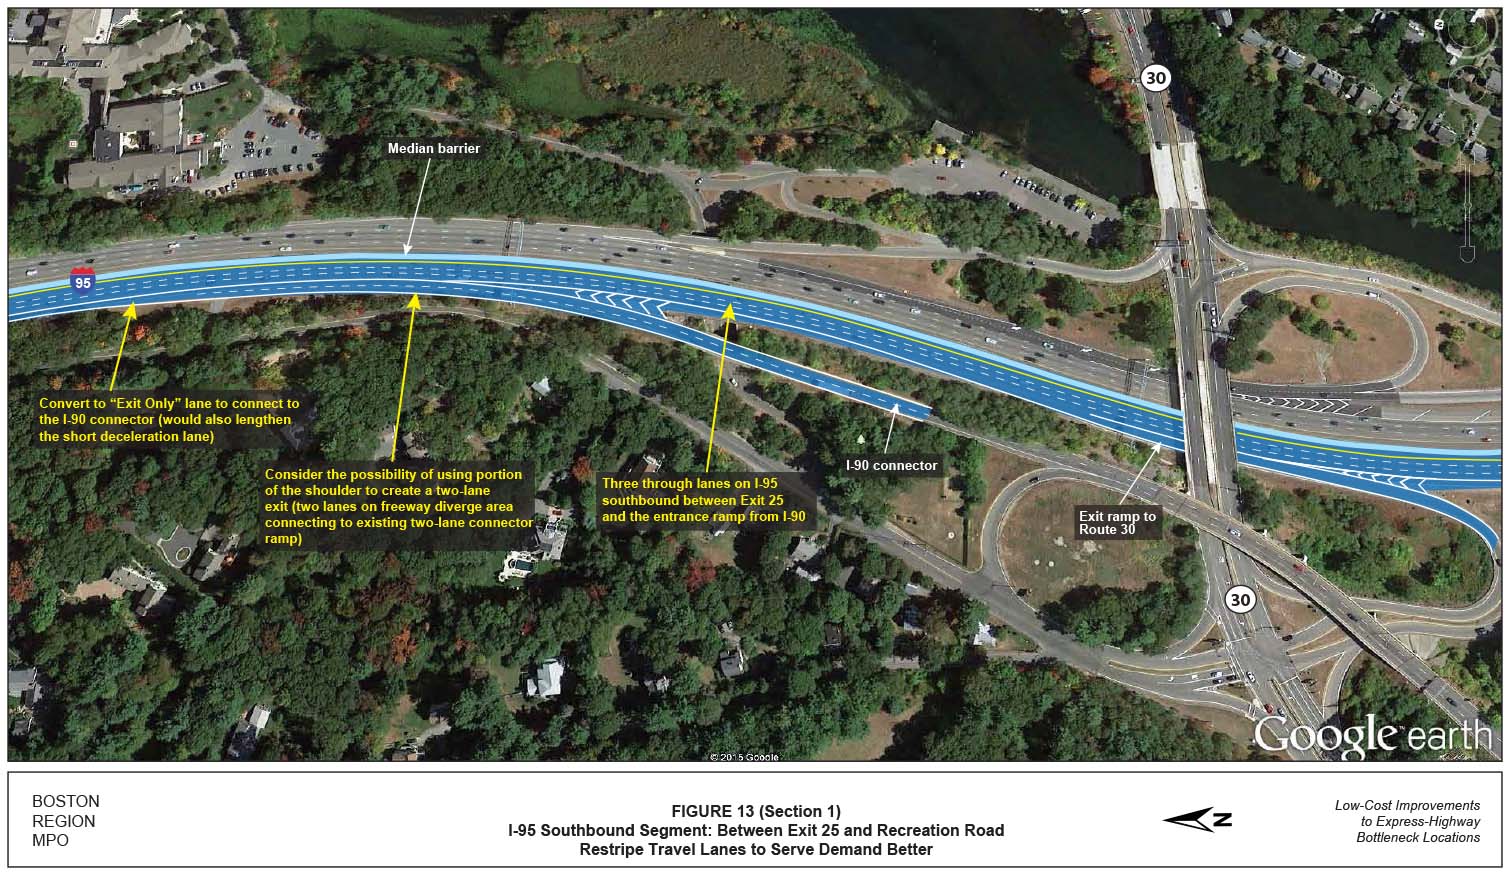 FIGURE 13. Aerial-view map showing the recommended improvement: restriping travel lanes to serve demand better 